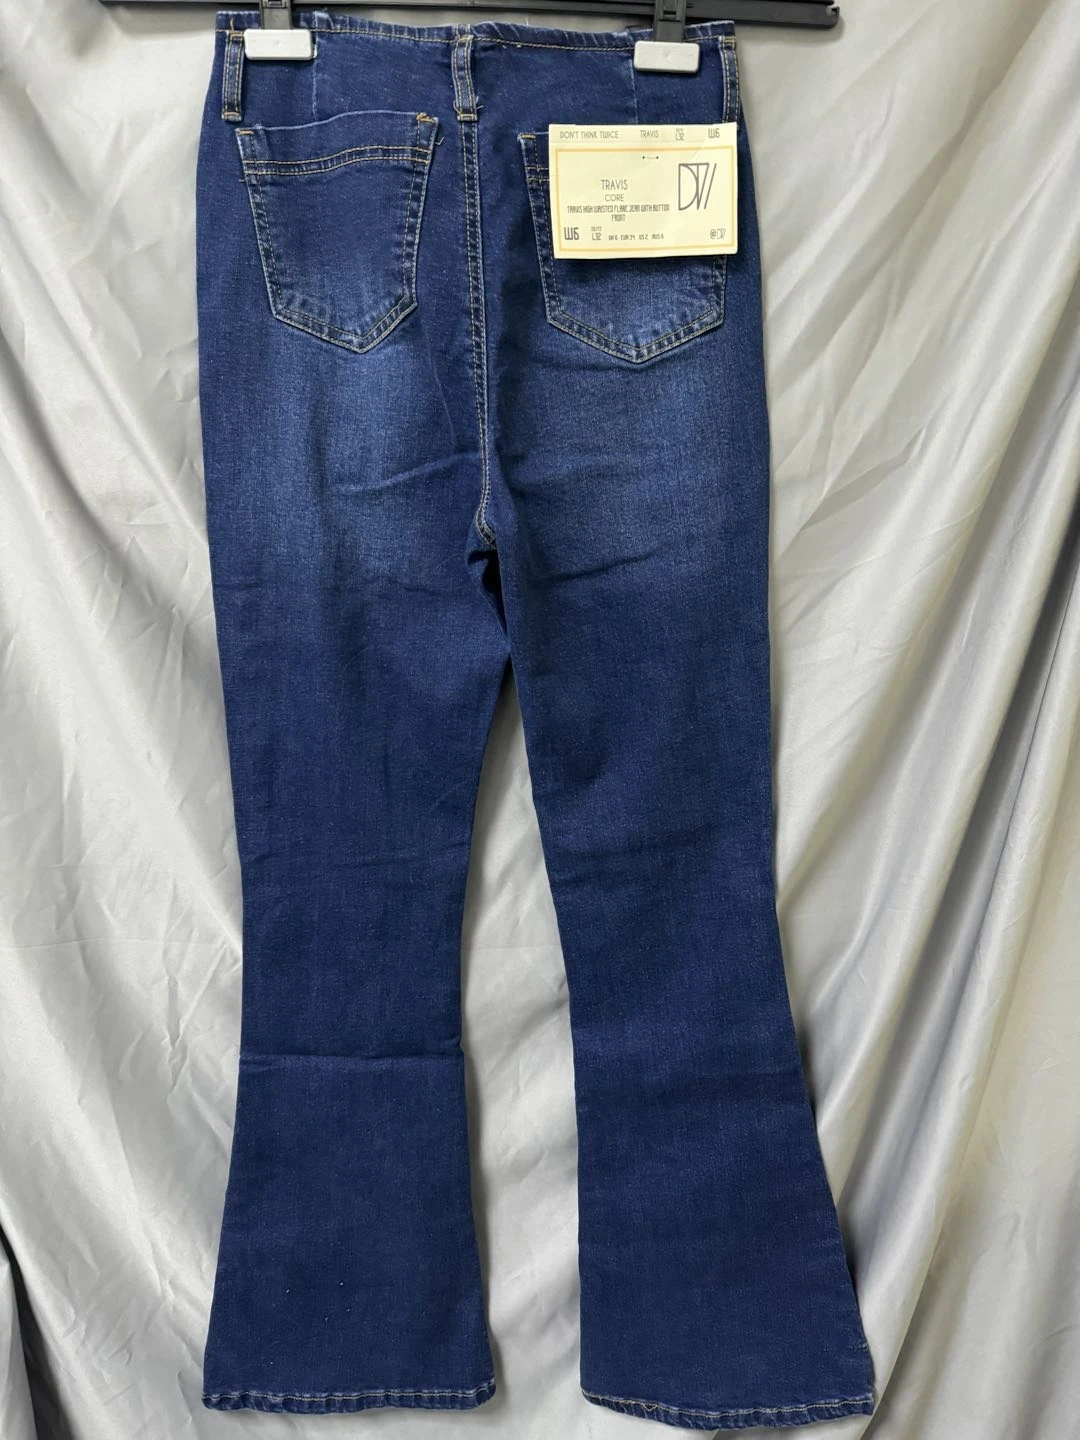 Topshop Joni flare jeans in mid blue 商品